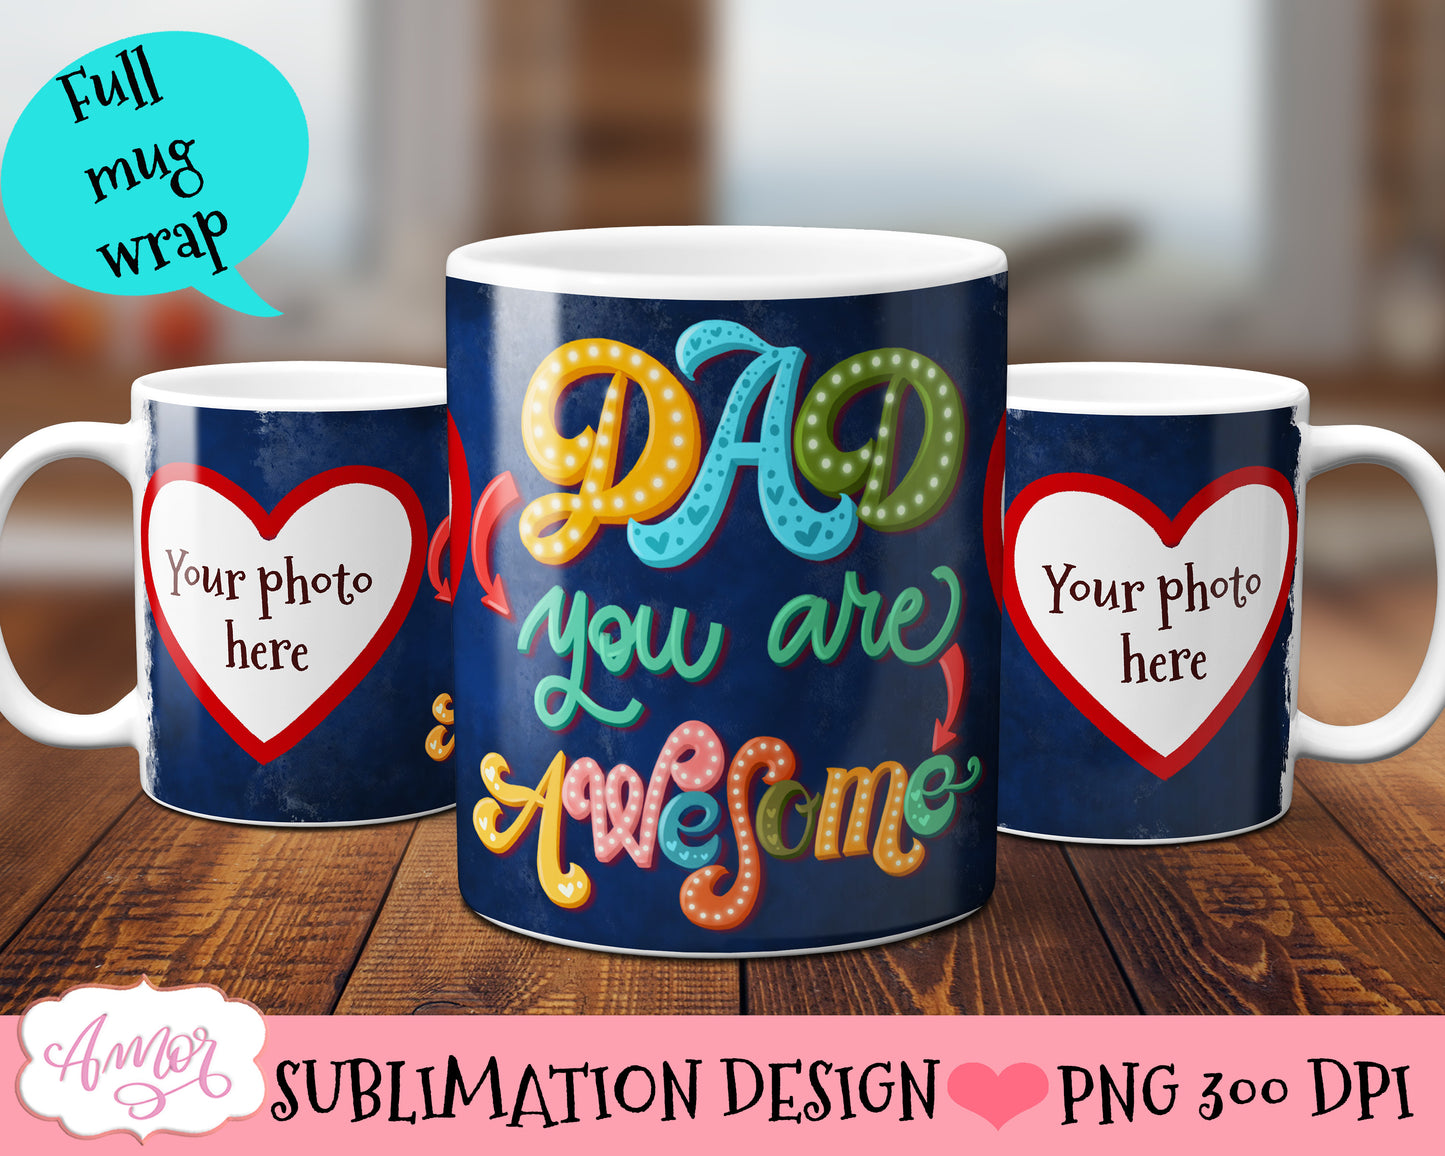 Picture mug wrap sublimation design for Father's day